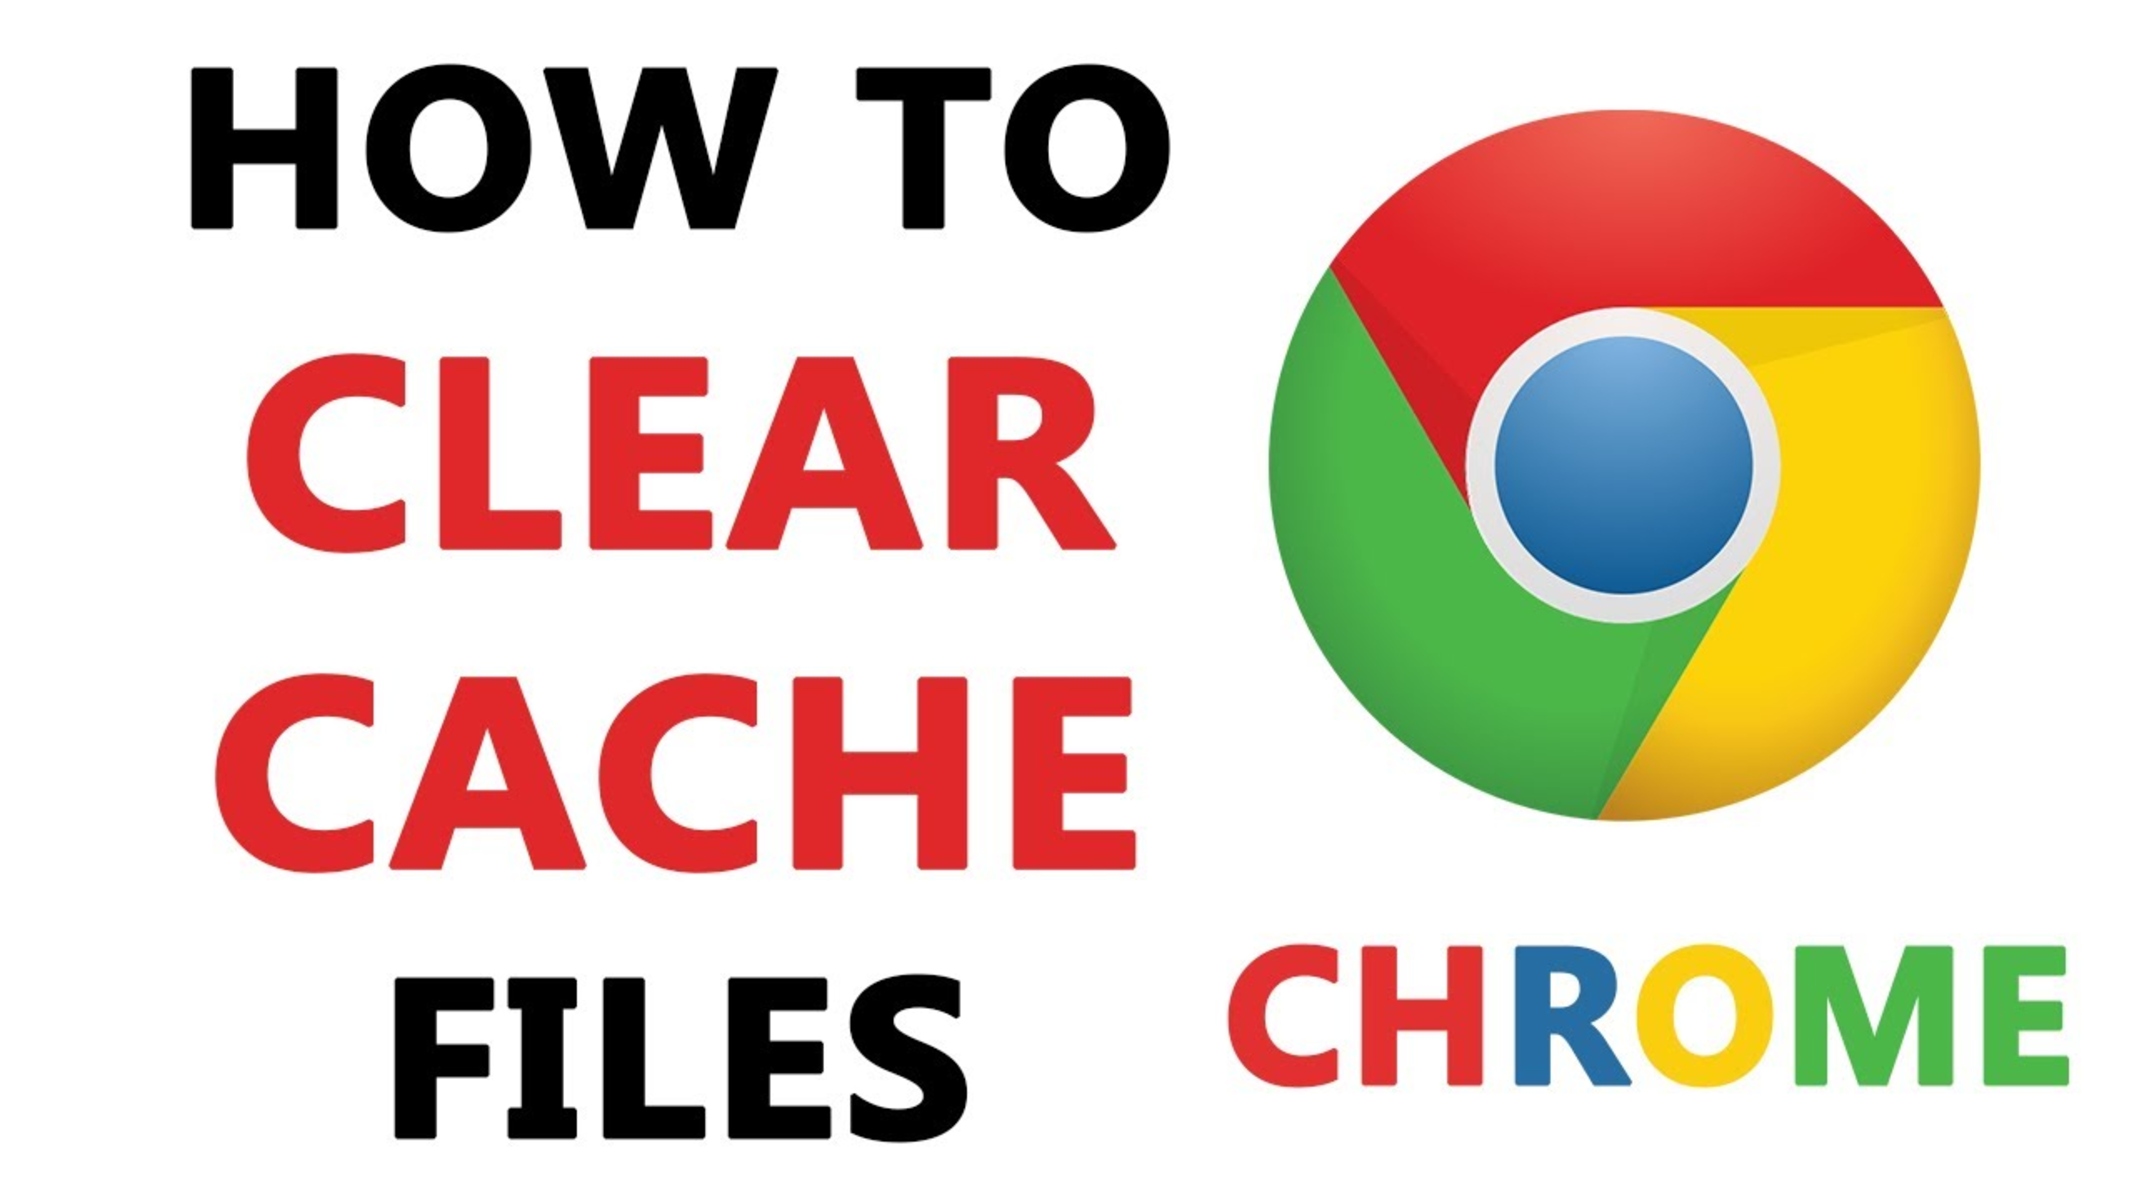 What Are Cached Images And Files In Chrome?